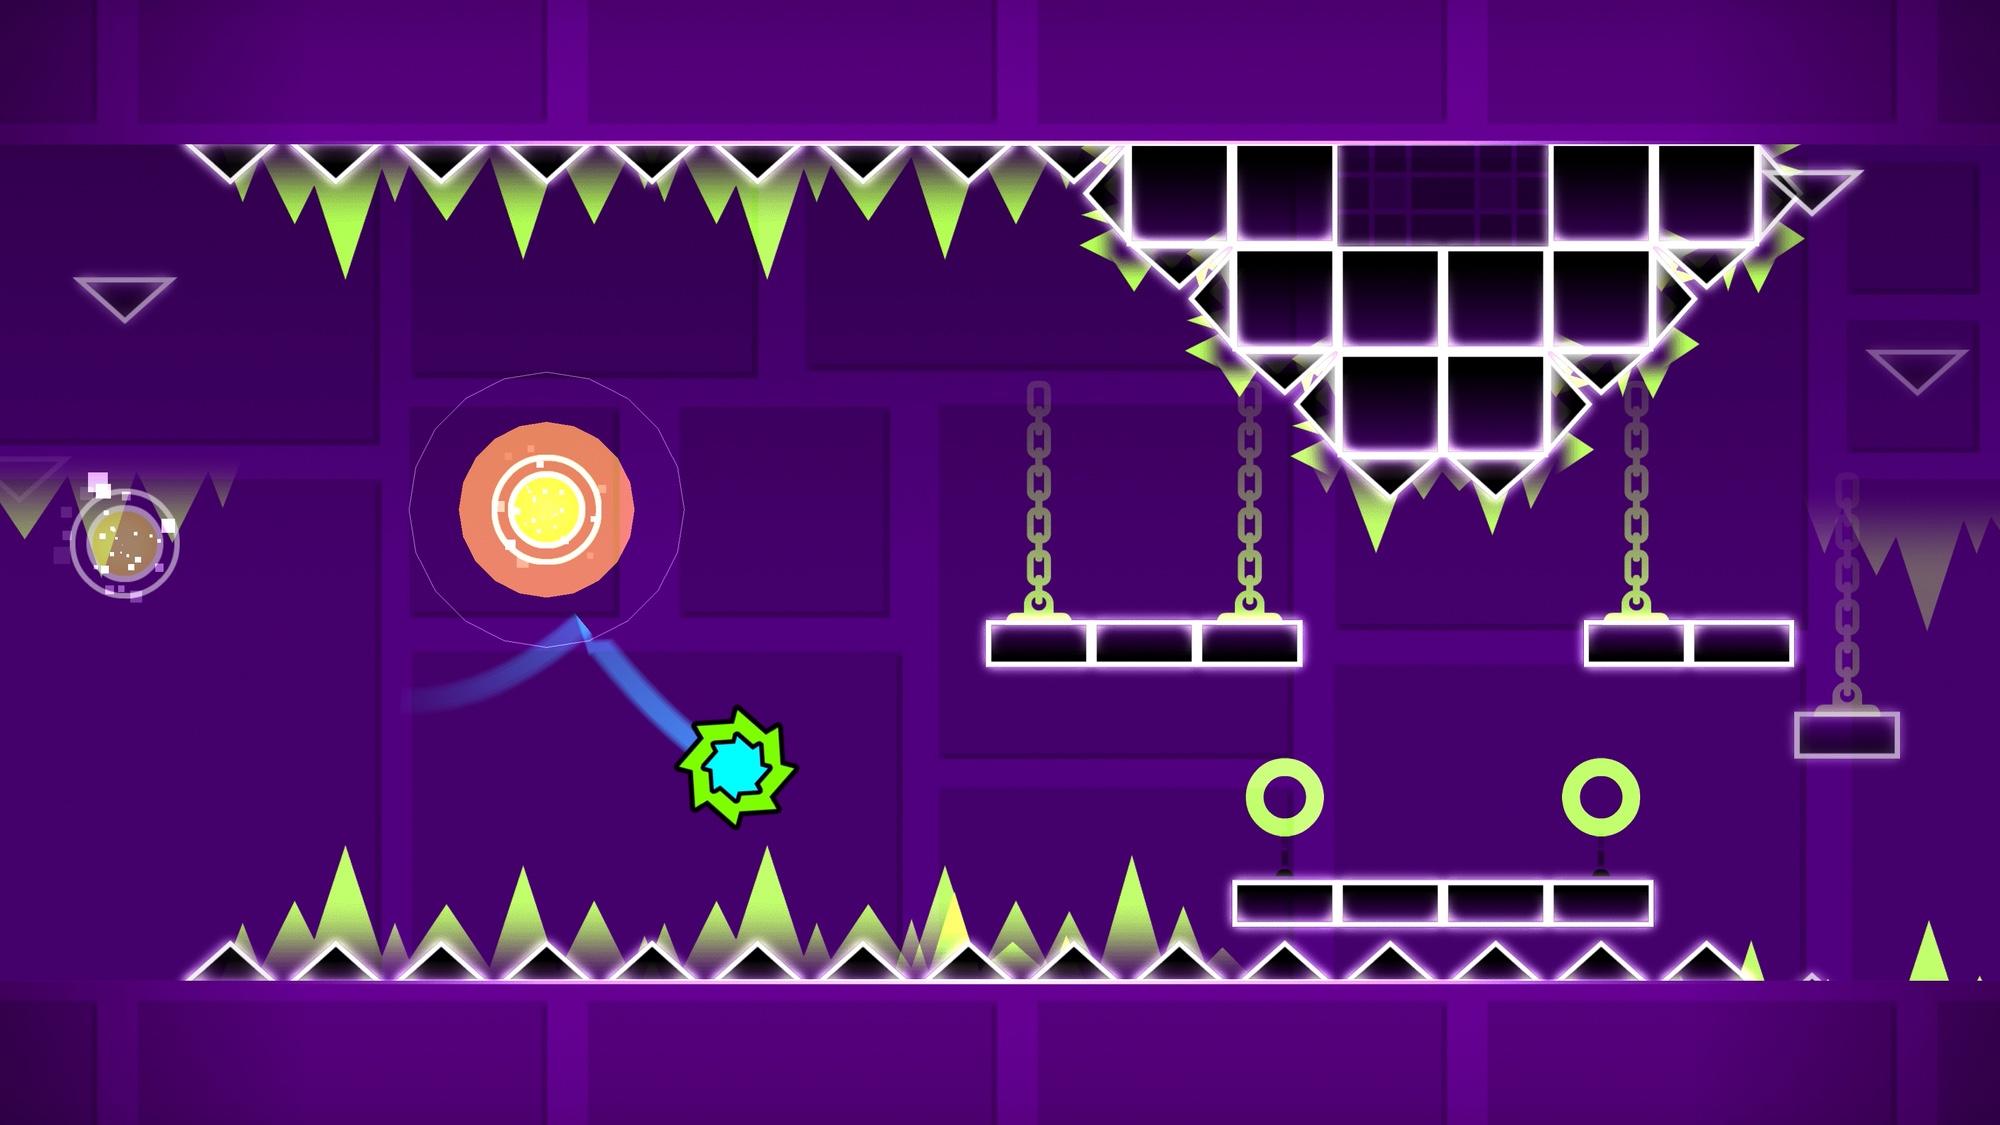 9th level of Geometry Dash, showing gravity ball mode (2013)